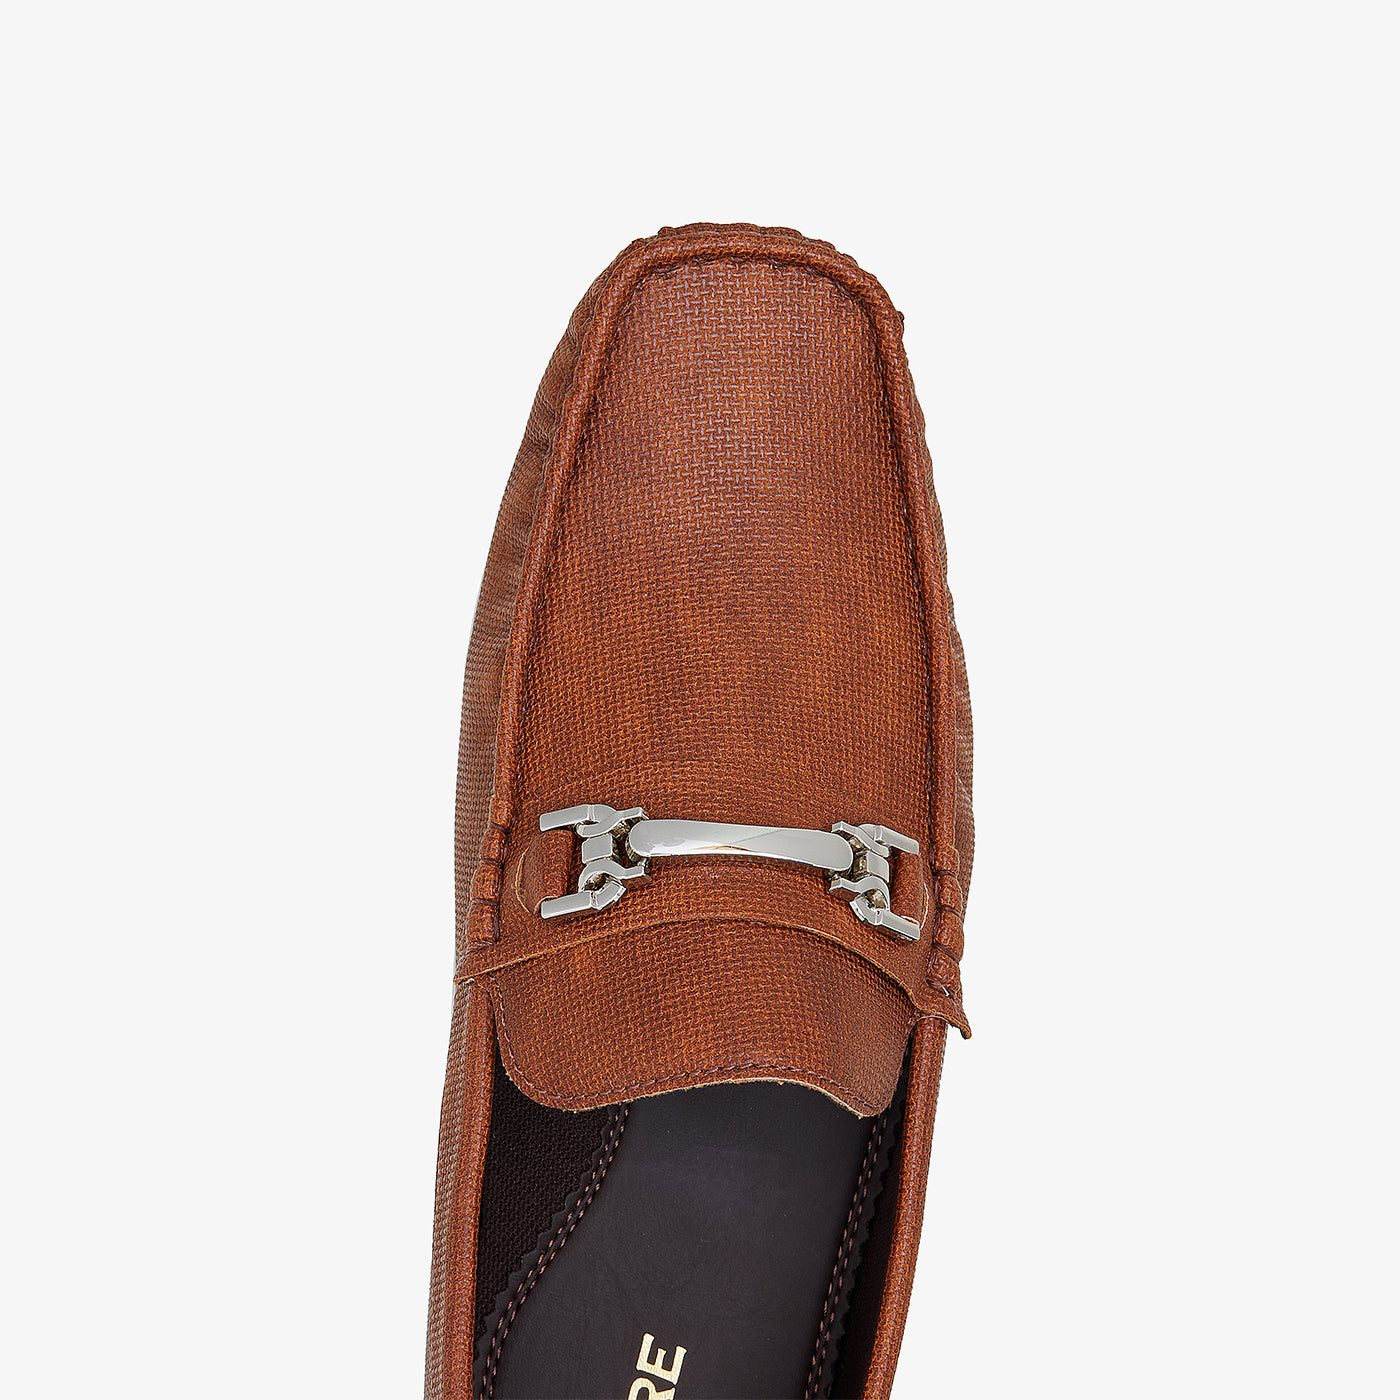 Men's Cushioned Loafers